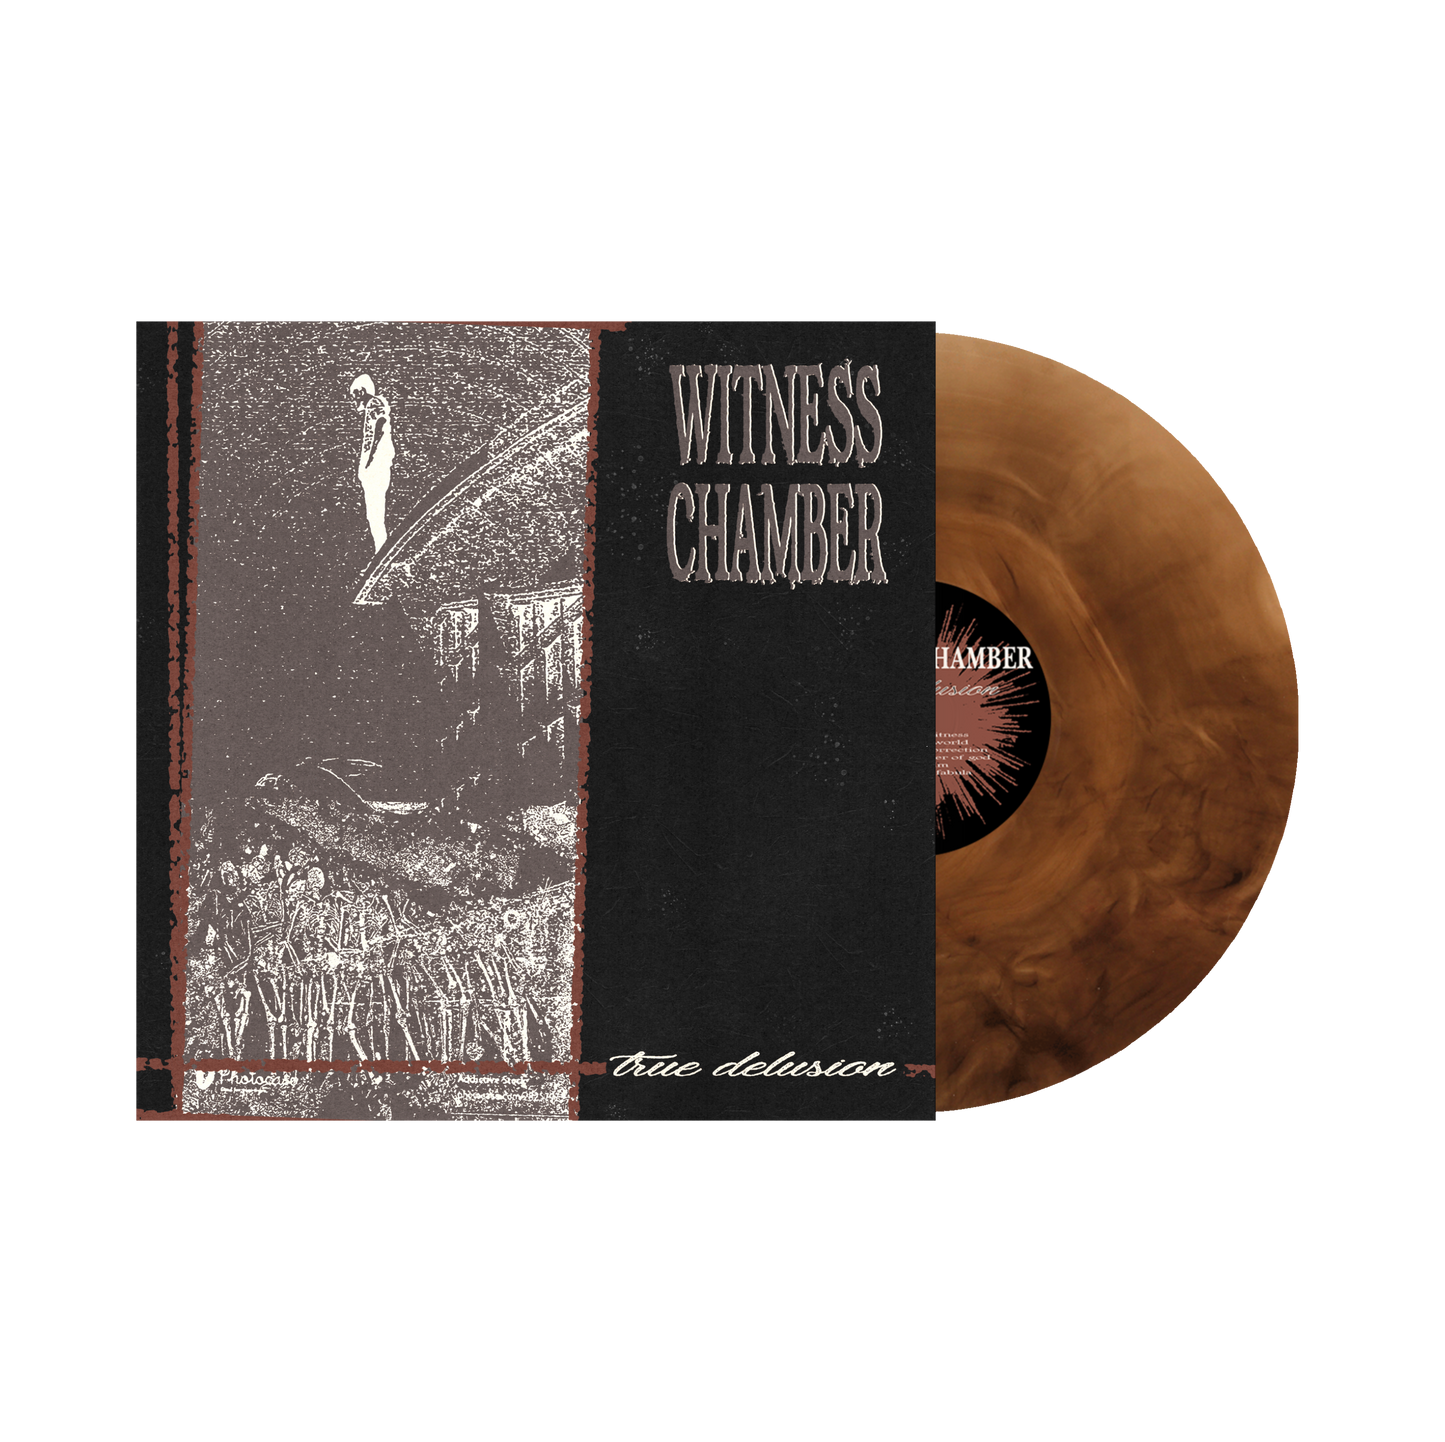 Witness Chamber  "True Delusion" LP